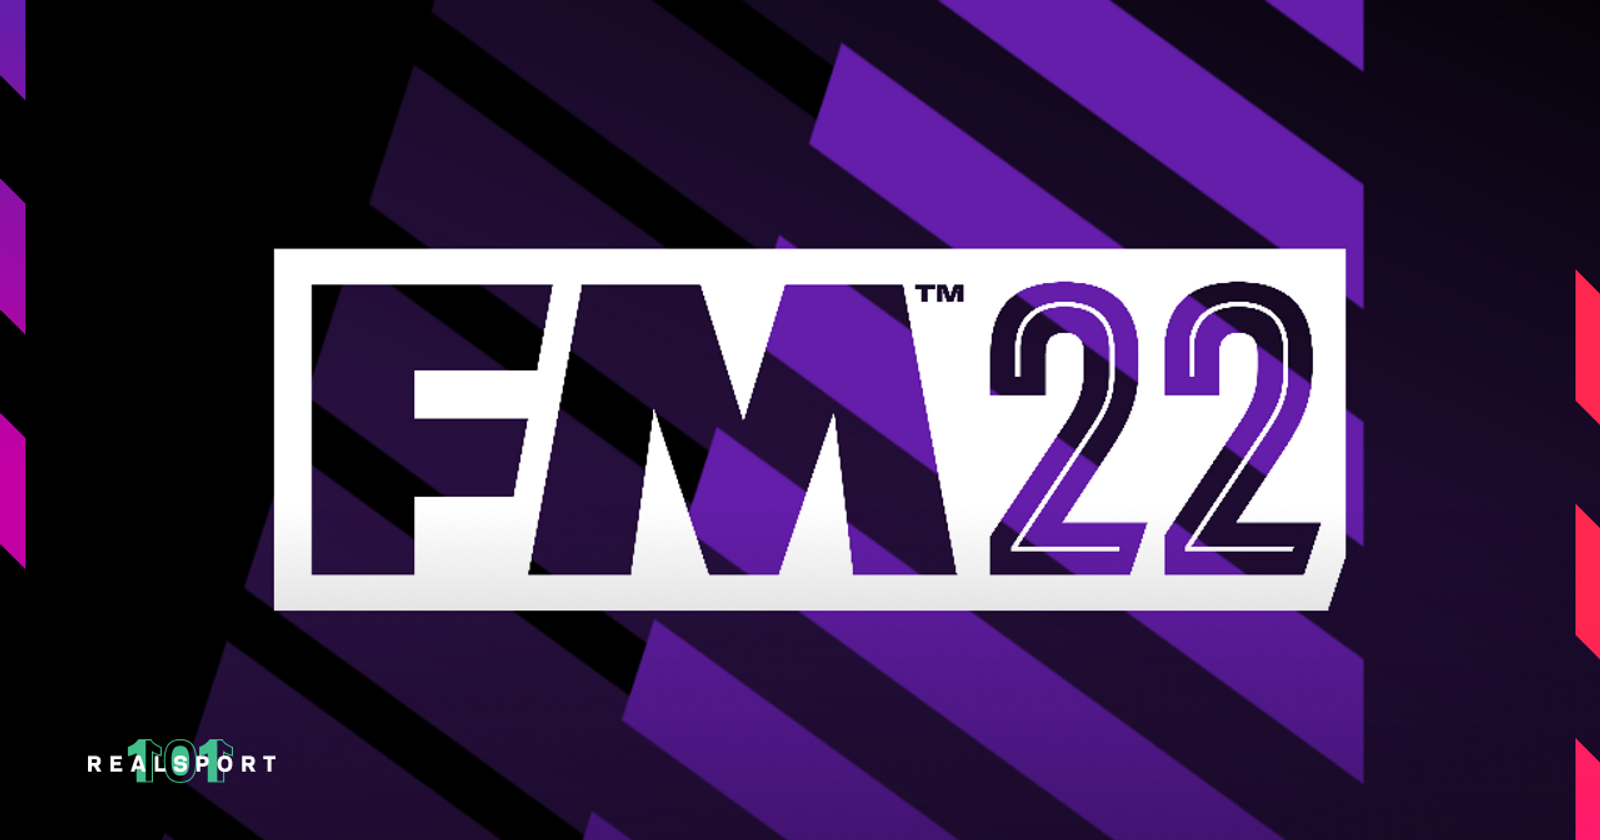 FM22 Early Beta Access Explained